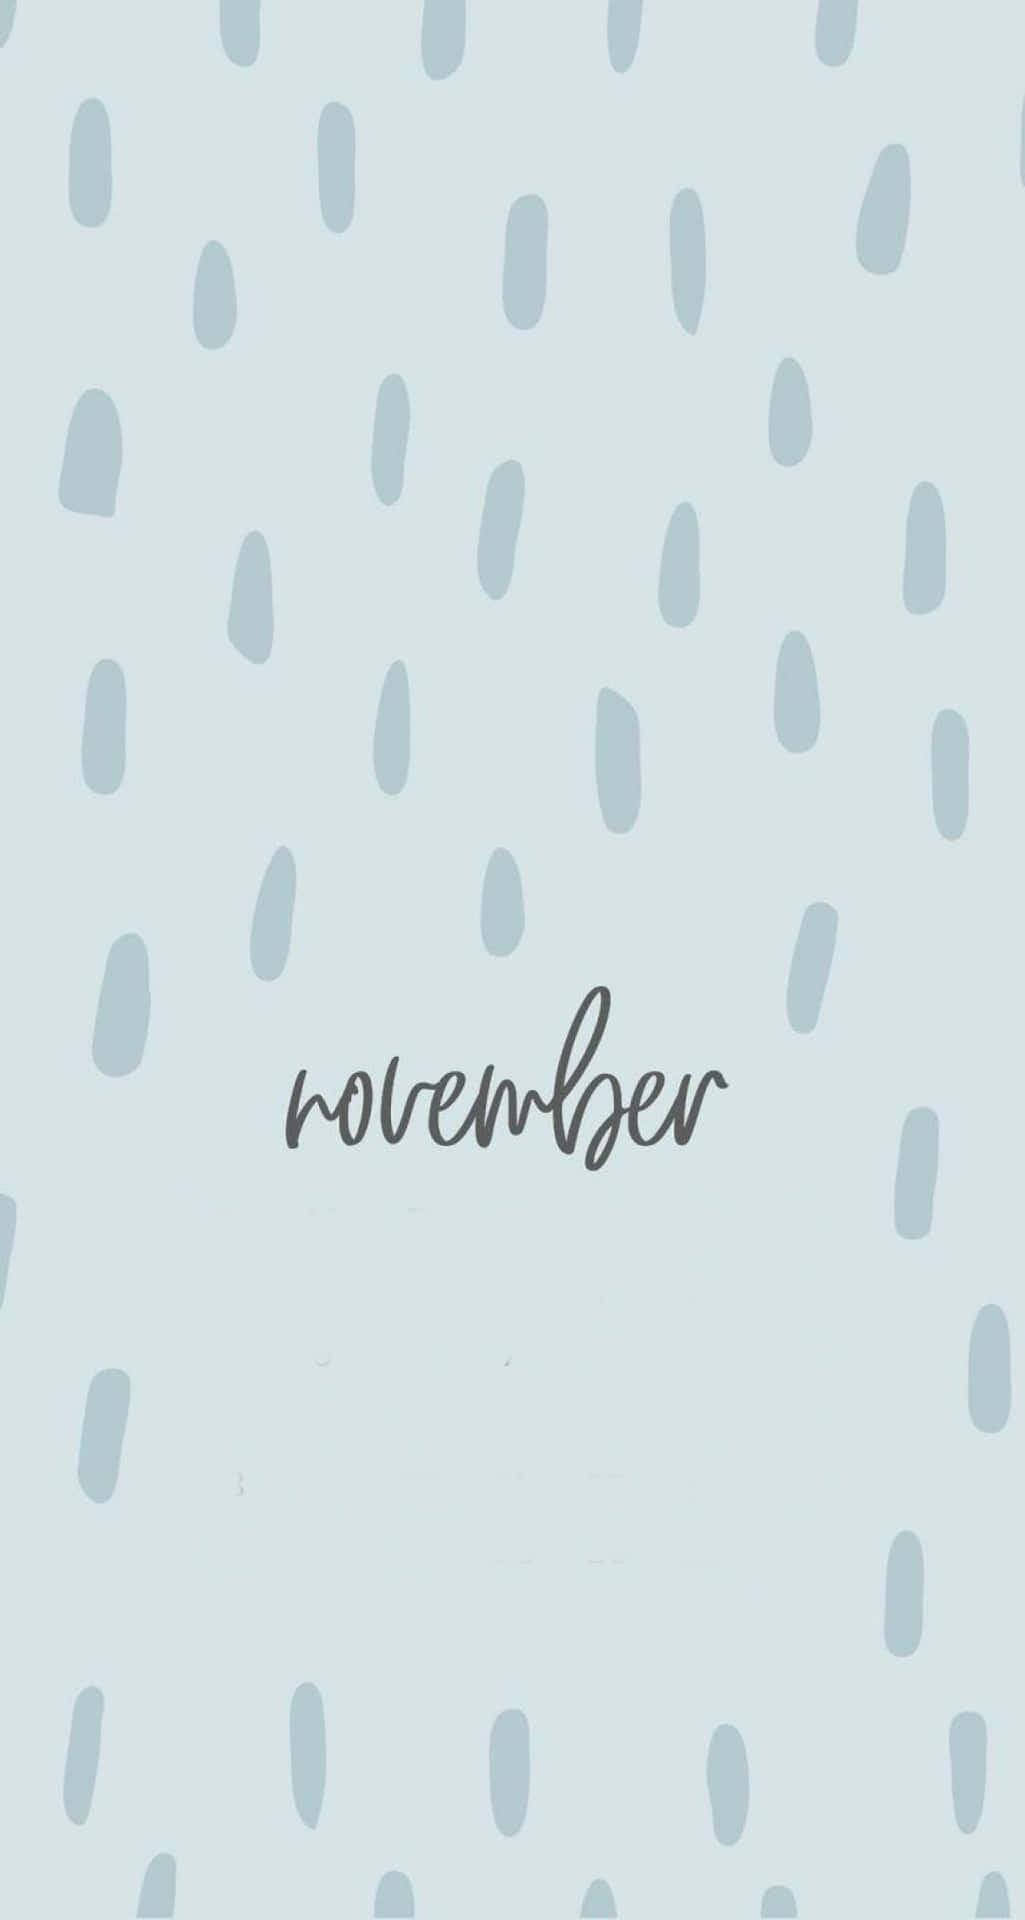 An autumnal aesthetic to embrace the chilly November days. Wallpaper